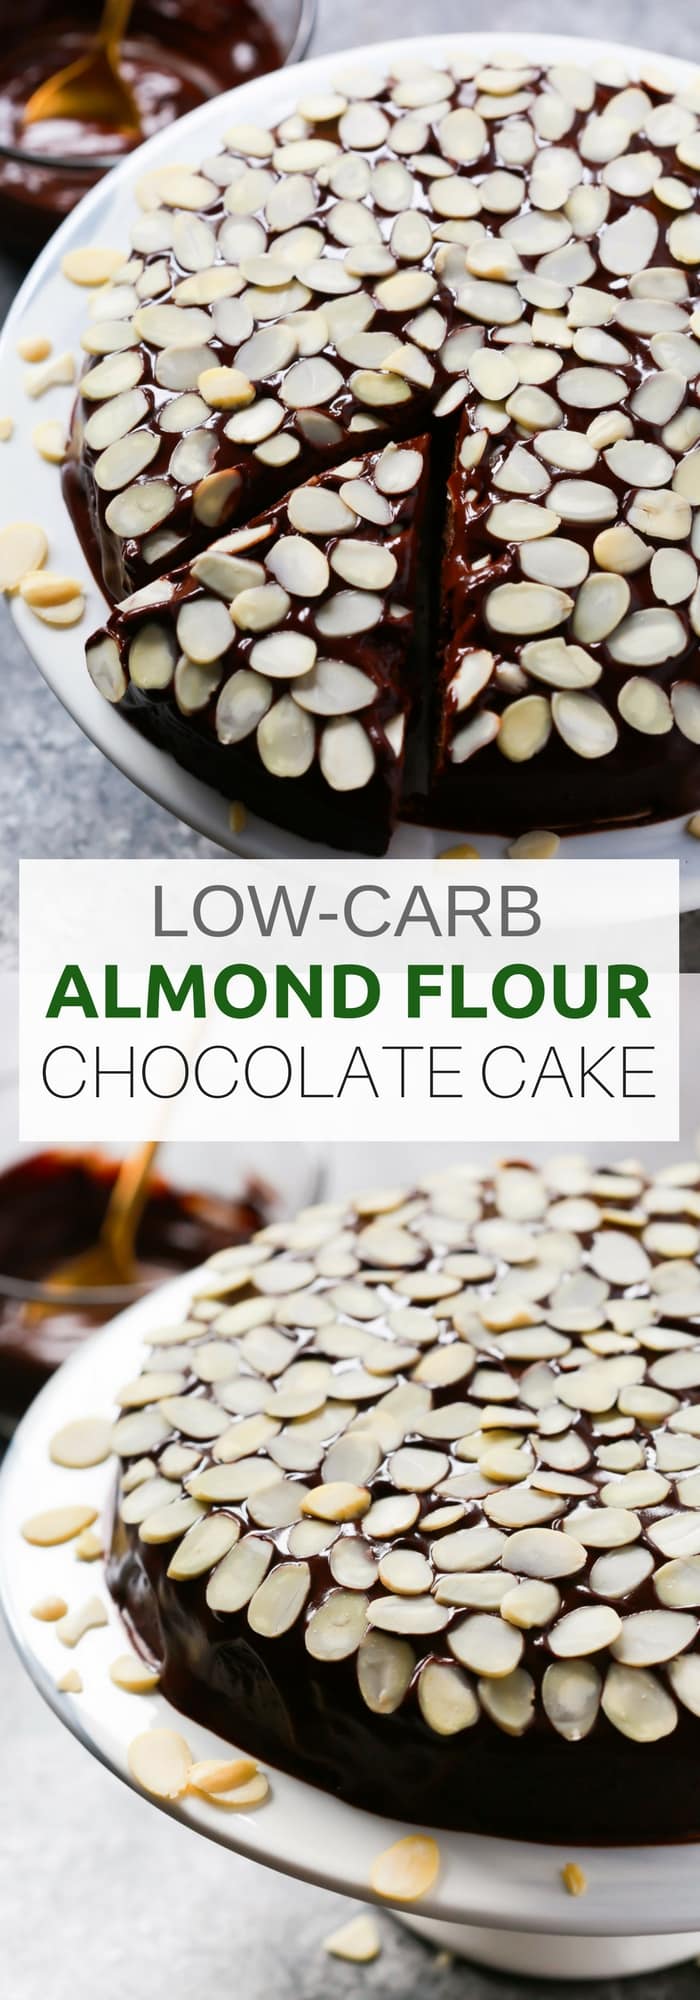  Healthier Low-carb Almond Flour Chocolate Cake for the Holidays! It’s made with almond flour, eggs, natural sweetener, cocoa power and lots of toasted natural sliced almonds. This cake is gluten-free too. Enjoy!